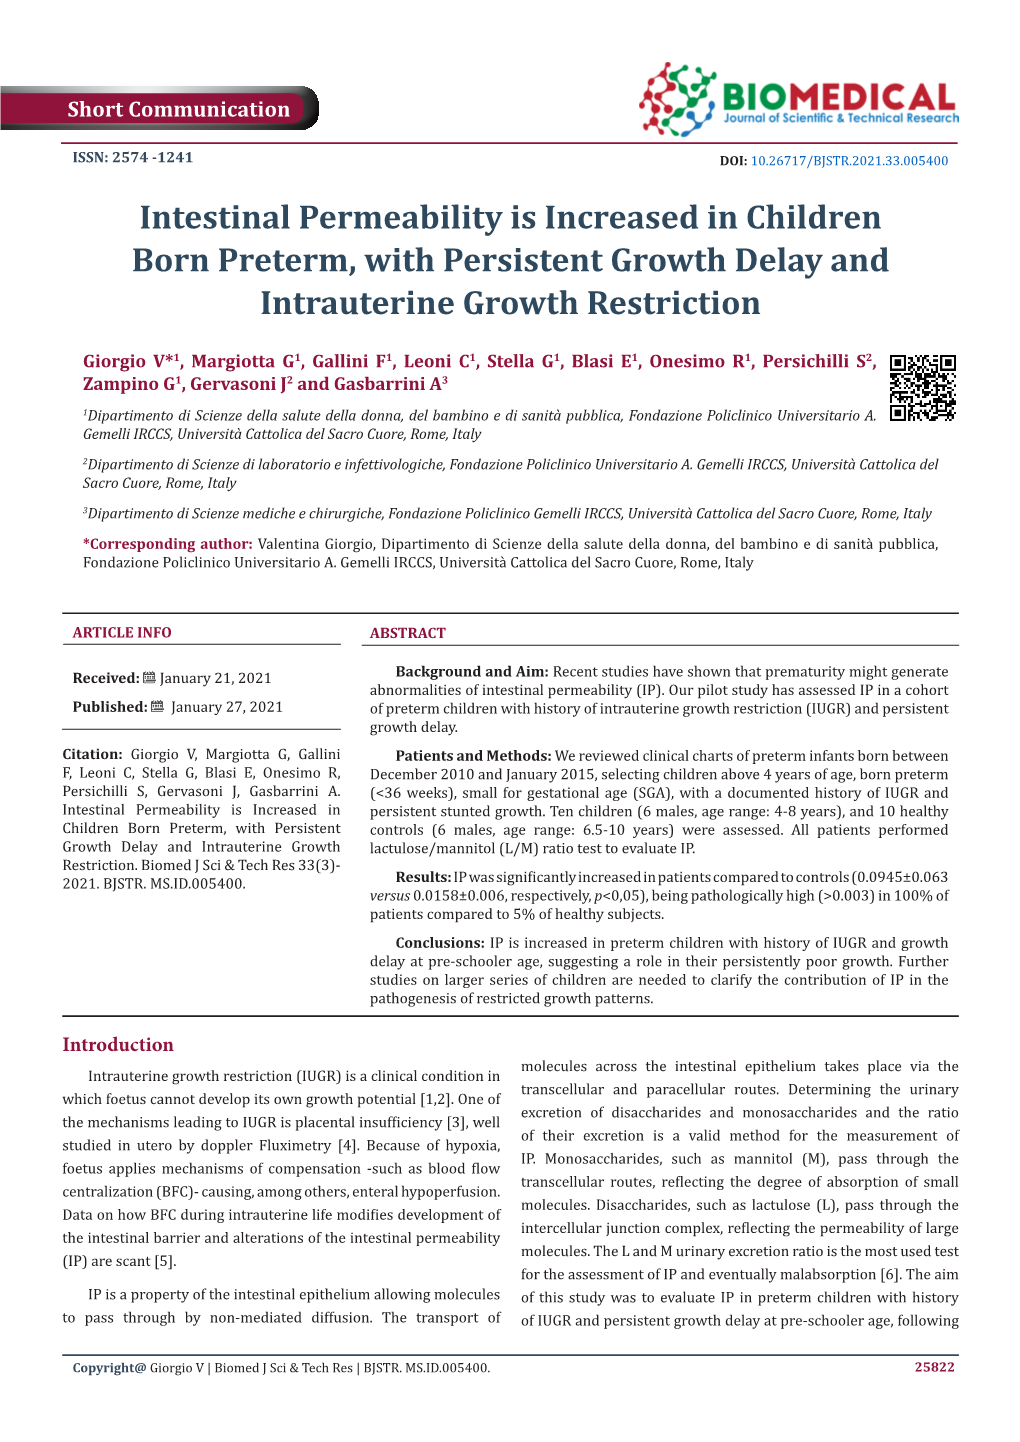 Intestinal Permeability Is Increased in Children Born Preterm, with Persistent Growth Delay and Intrauterine Growth Restriction